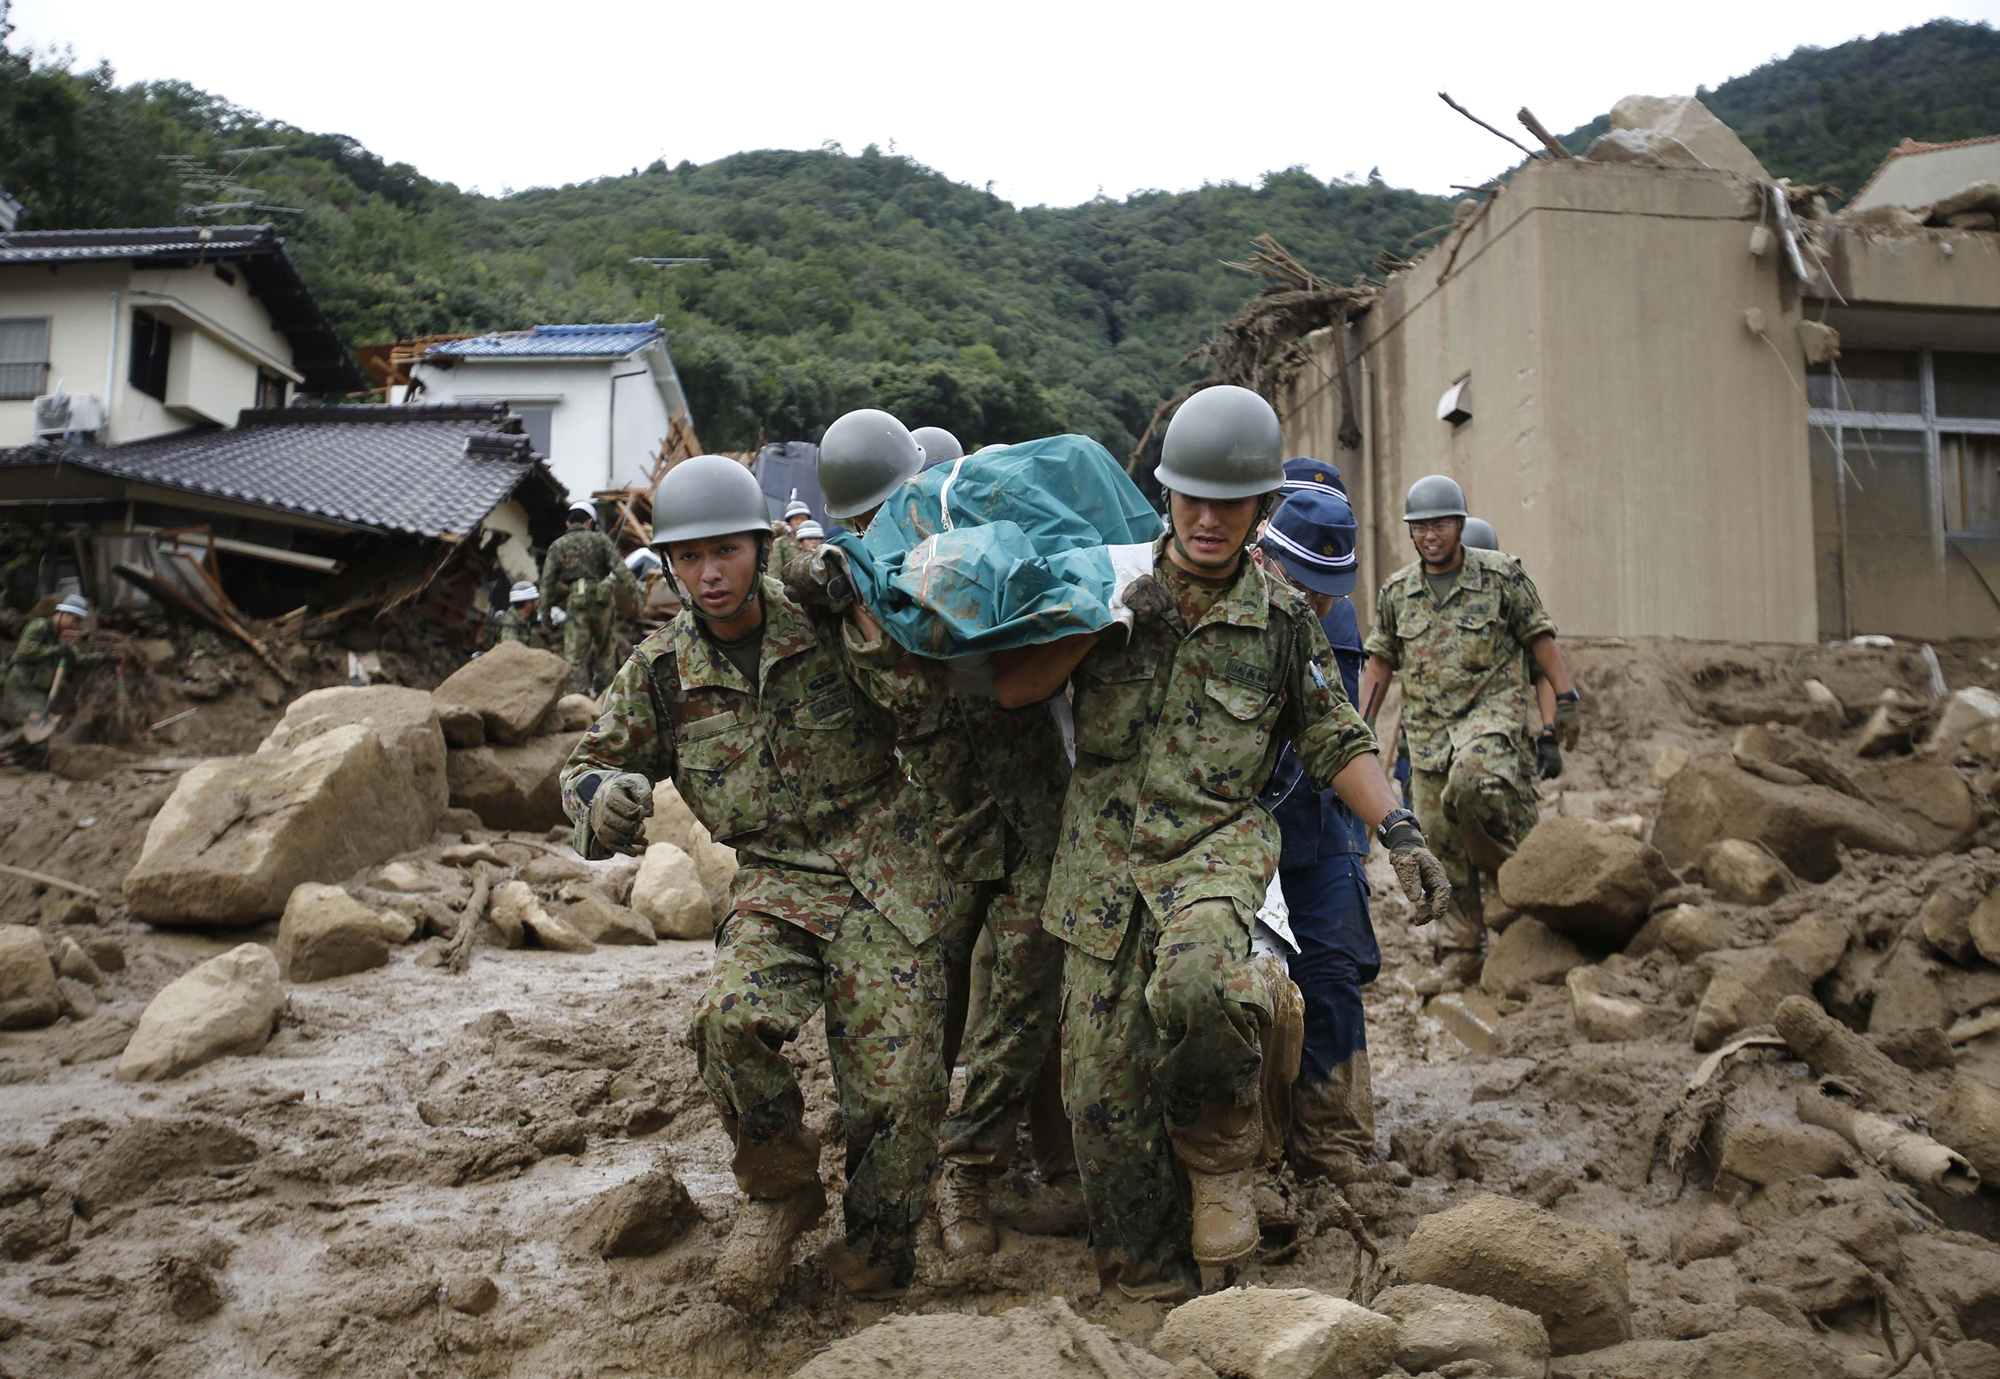 Japan Self-Defense Force soldiers and police officers carry the body of a victim in a plastic bag at a site where a landslide swept through a residential area at Asaminami ward in Hiroshima, western Japan, Aug. 20, 2014.